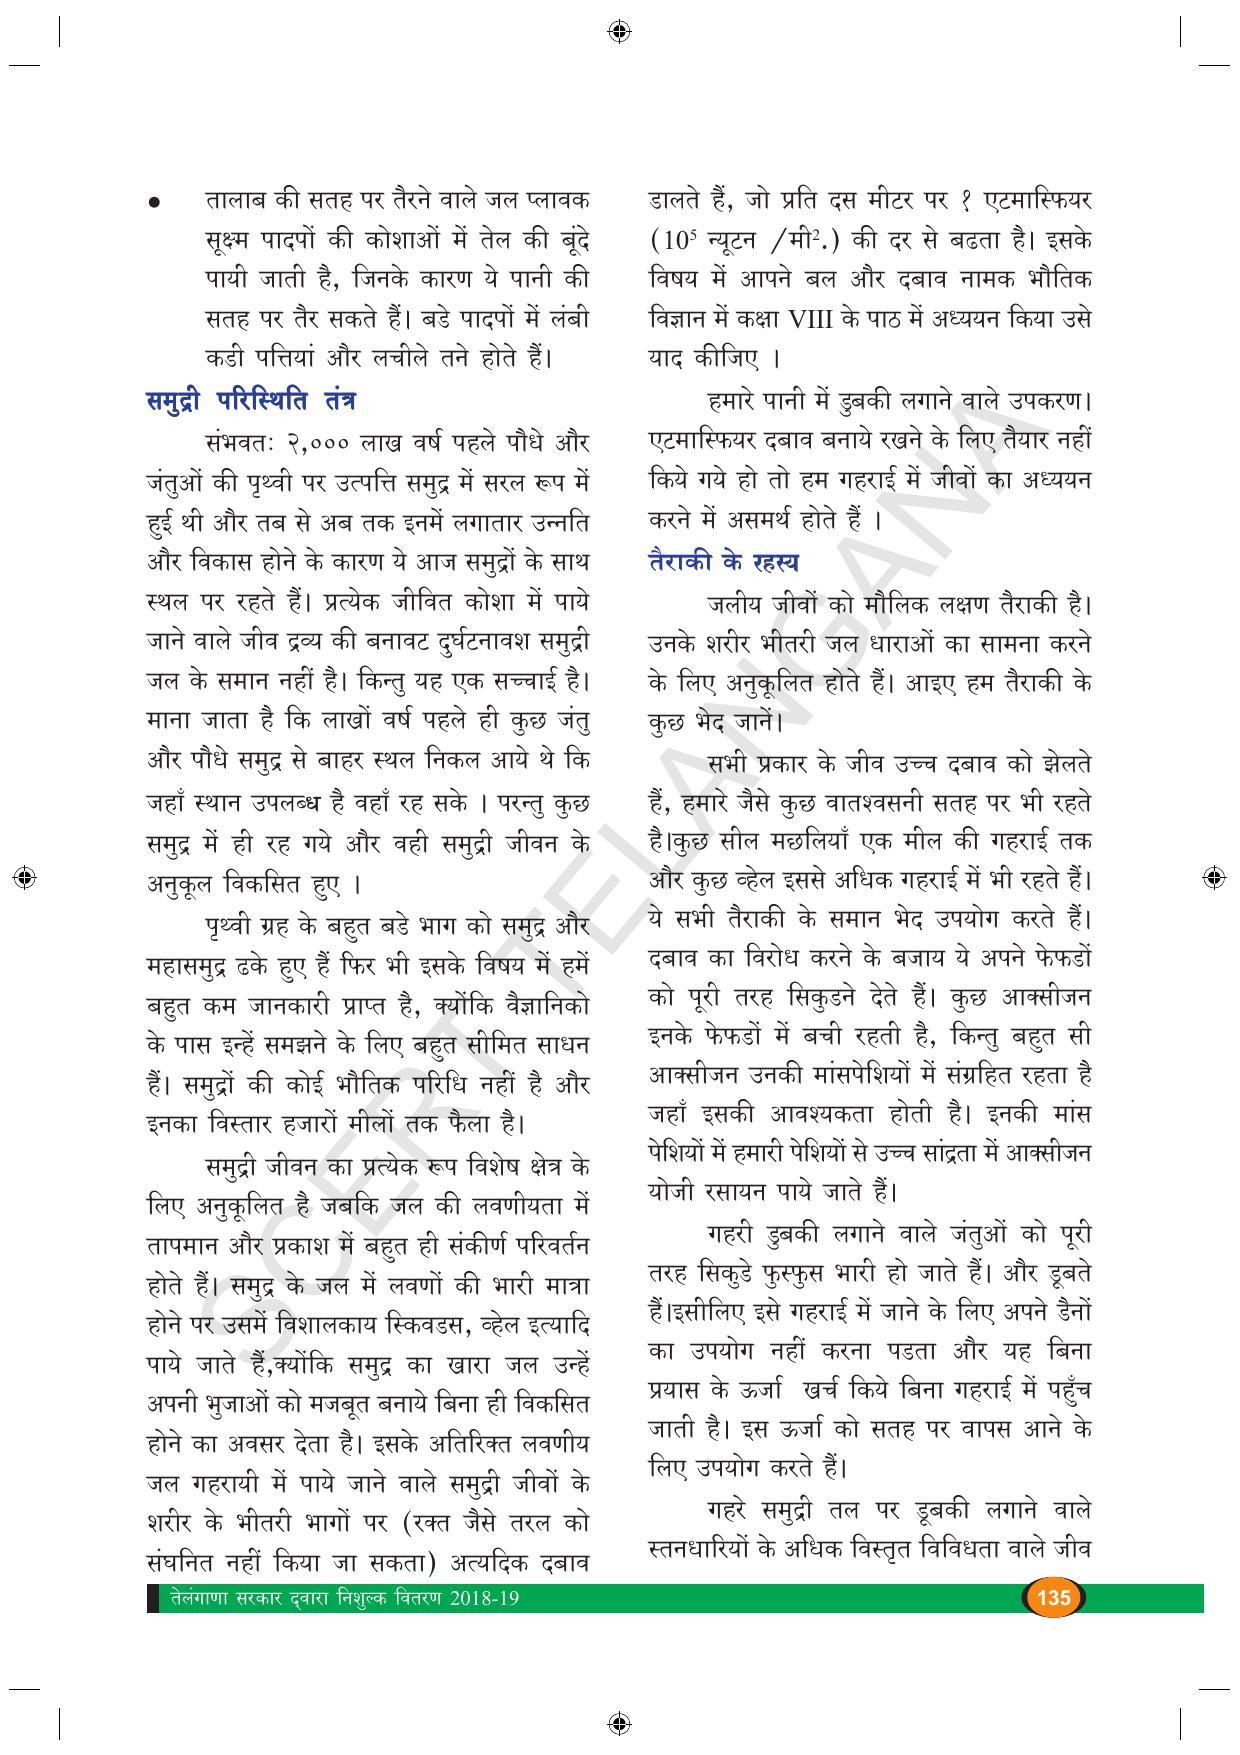 TS SCERT Class 9 Biological Science (Hindi Medium) Text Book - Page 147